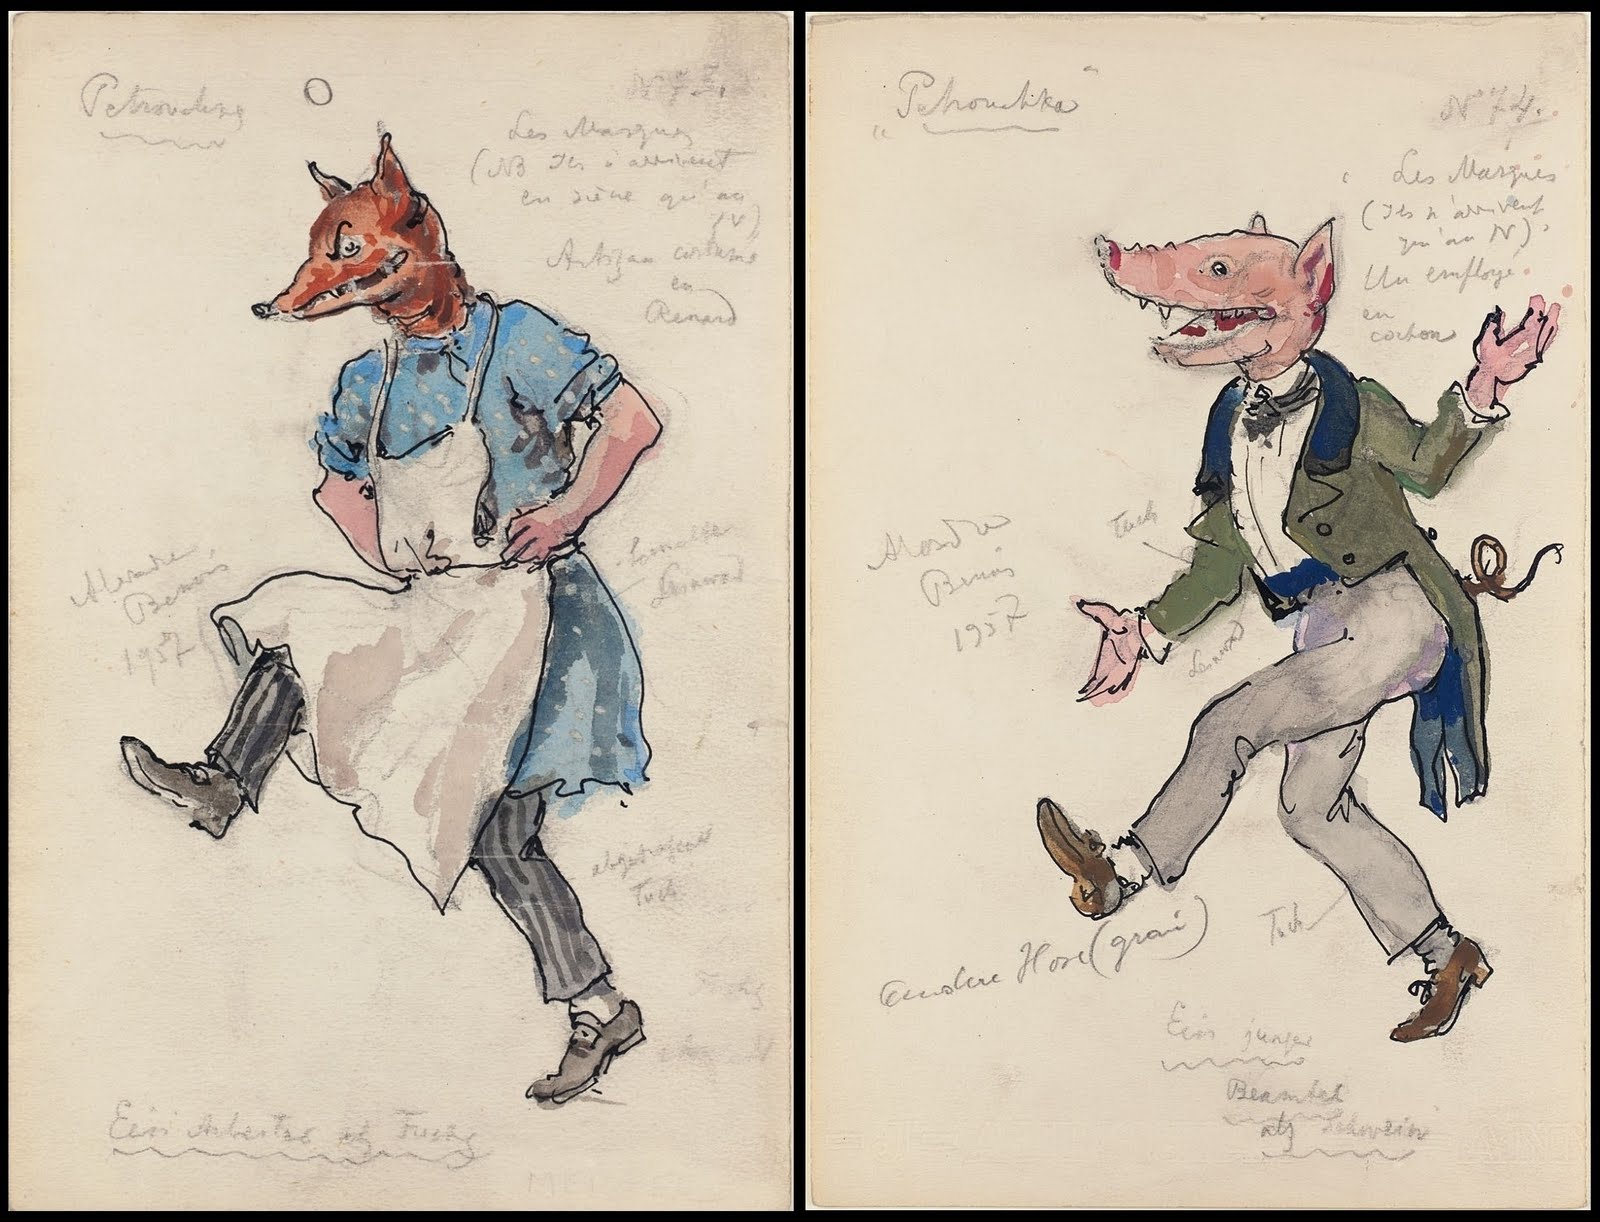 anthropomorphic pig and fox drawings for the ballet, Petrushka